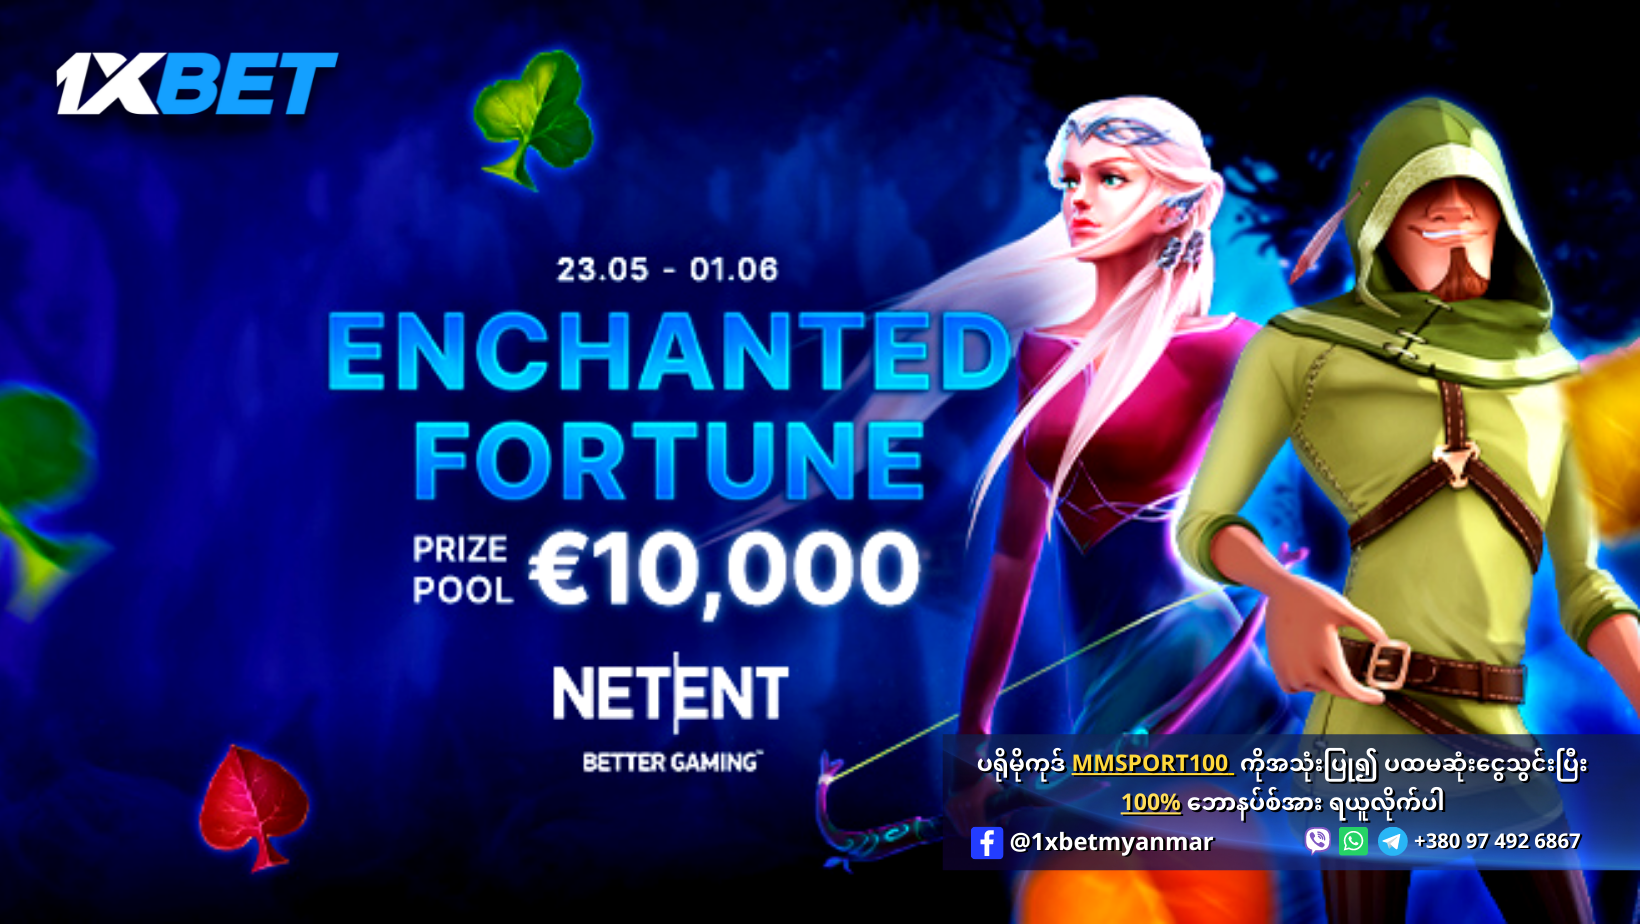 1xBet Enchanted Fortune Promotion